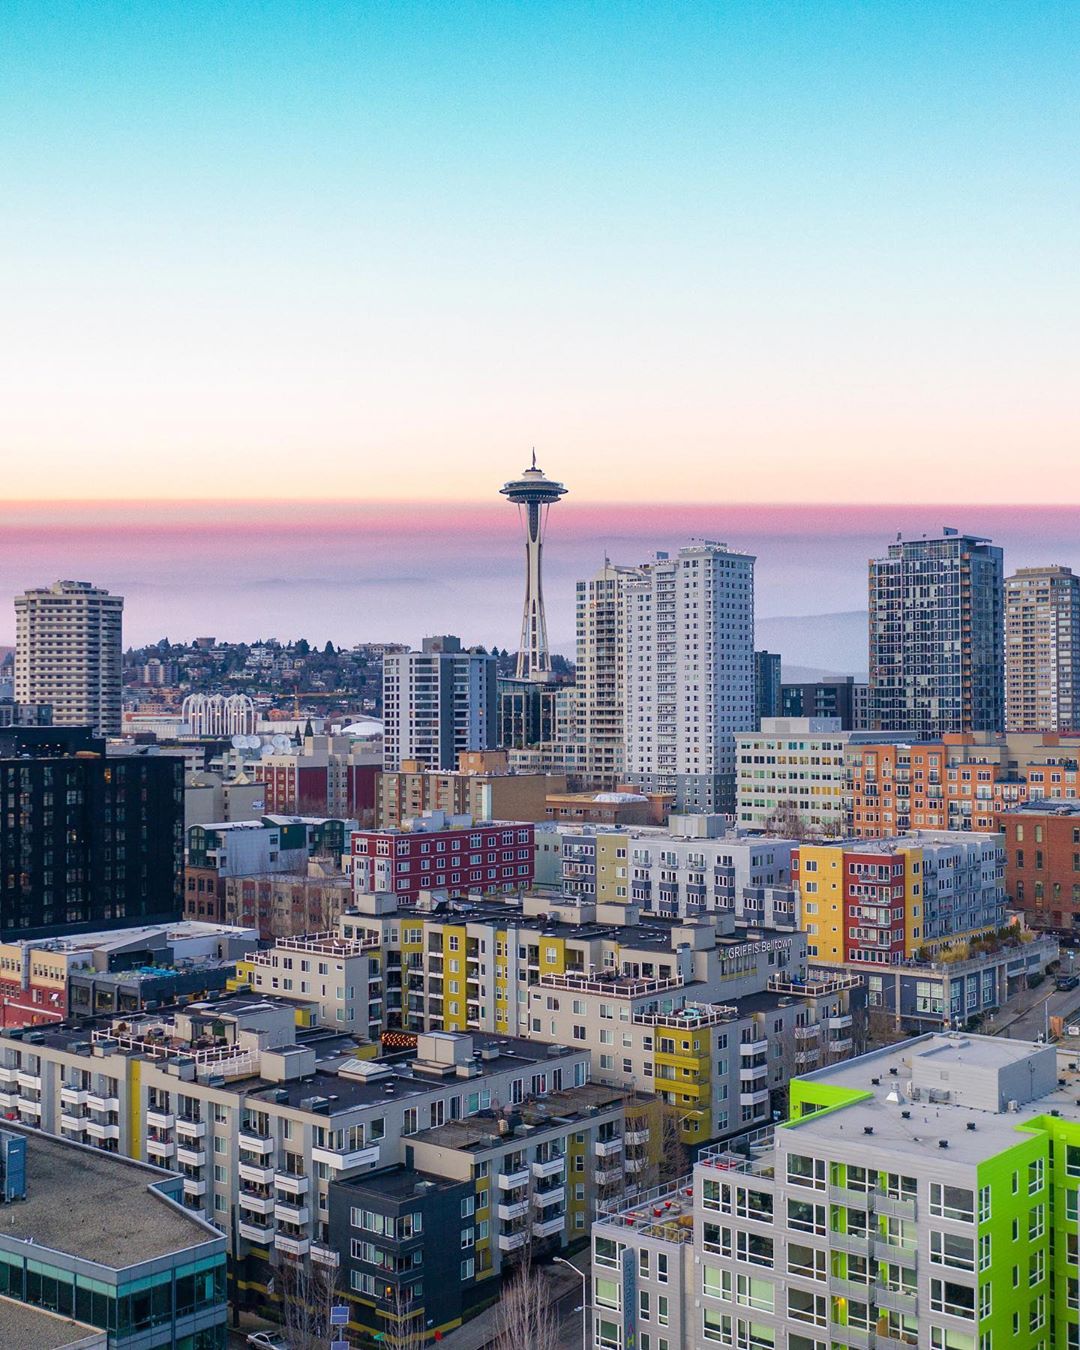 Skyline of tall buildings and in Downtown Seattle. Photo by Instagram user @codycm